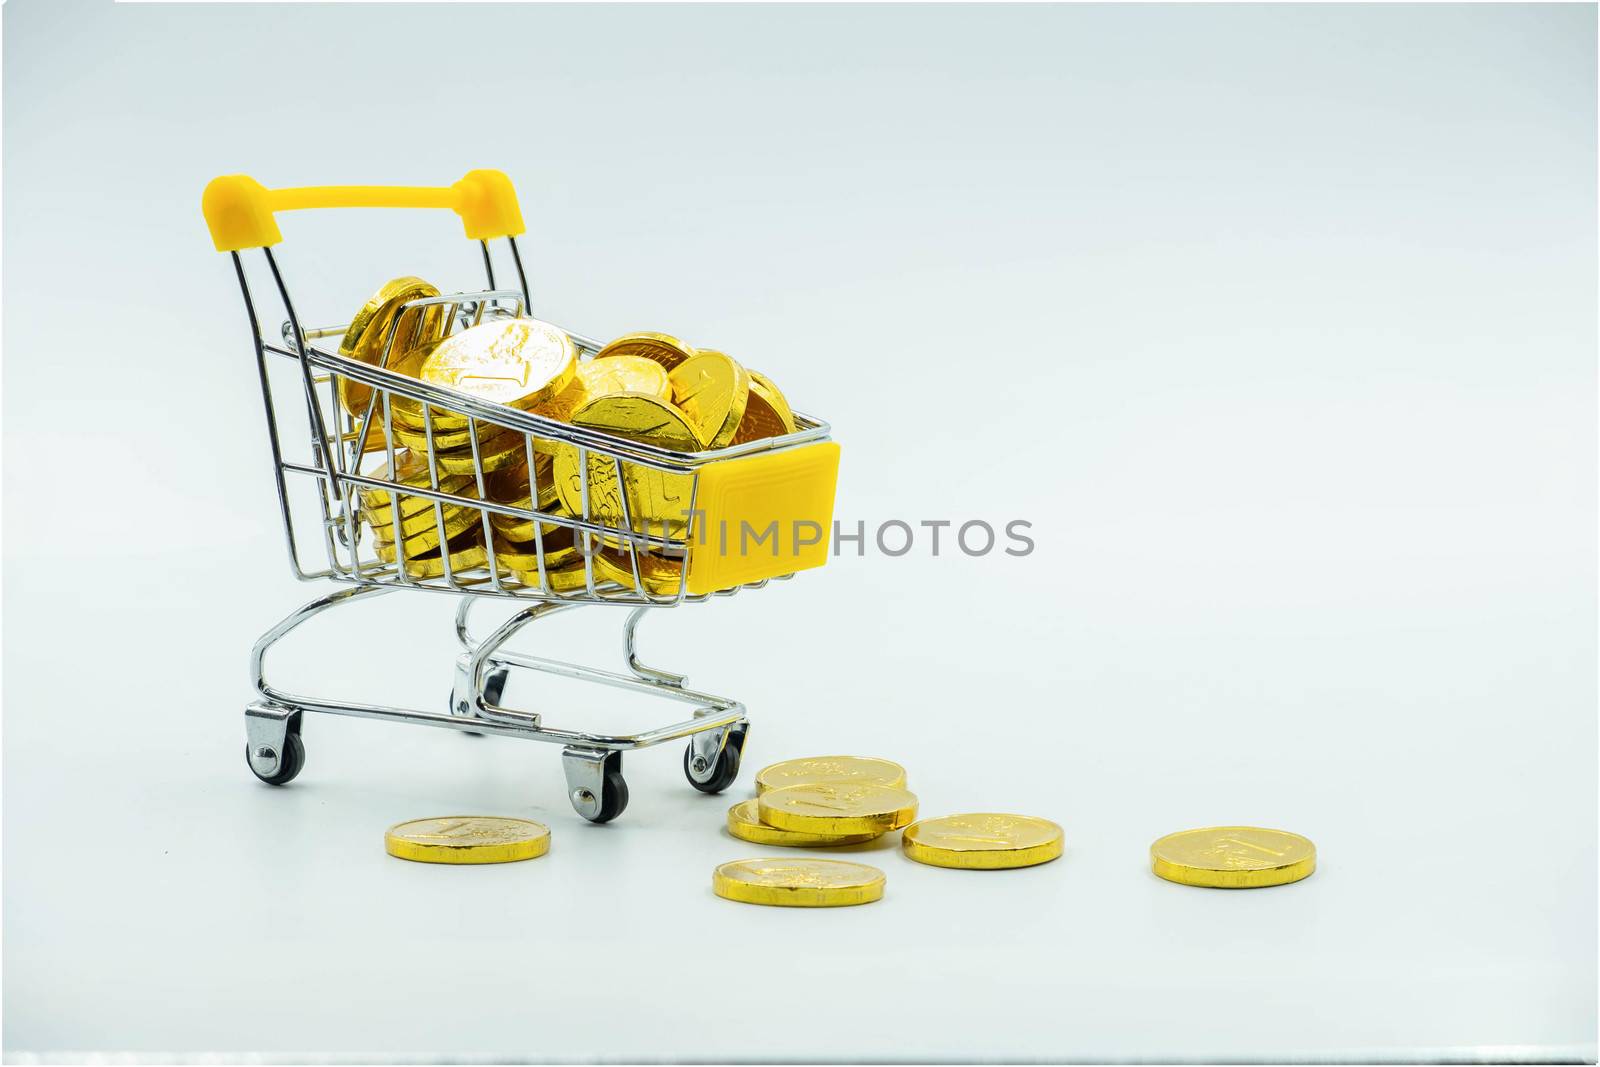 Shopping cart and Gold coins Isolated on White background by Bonn2210